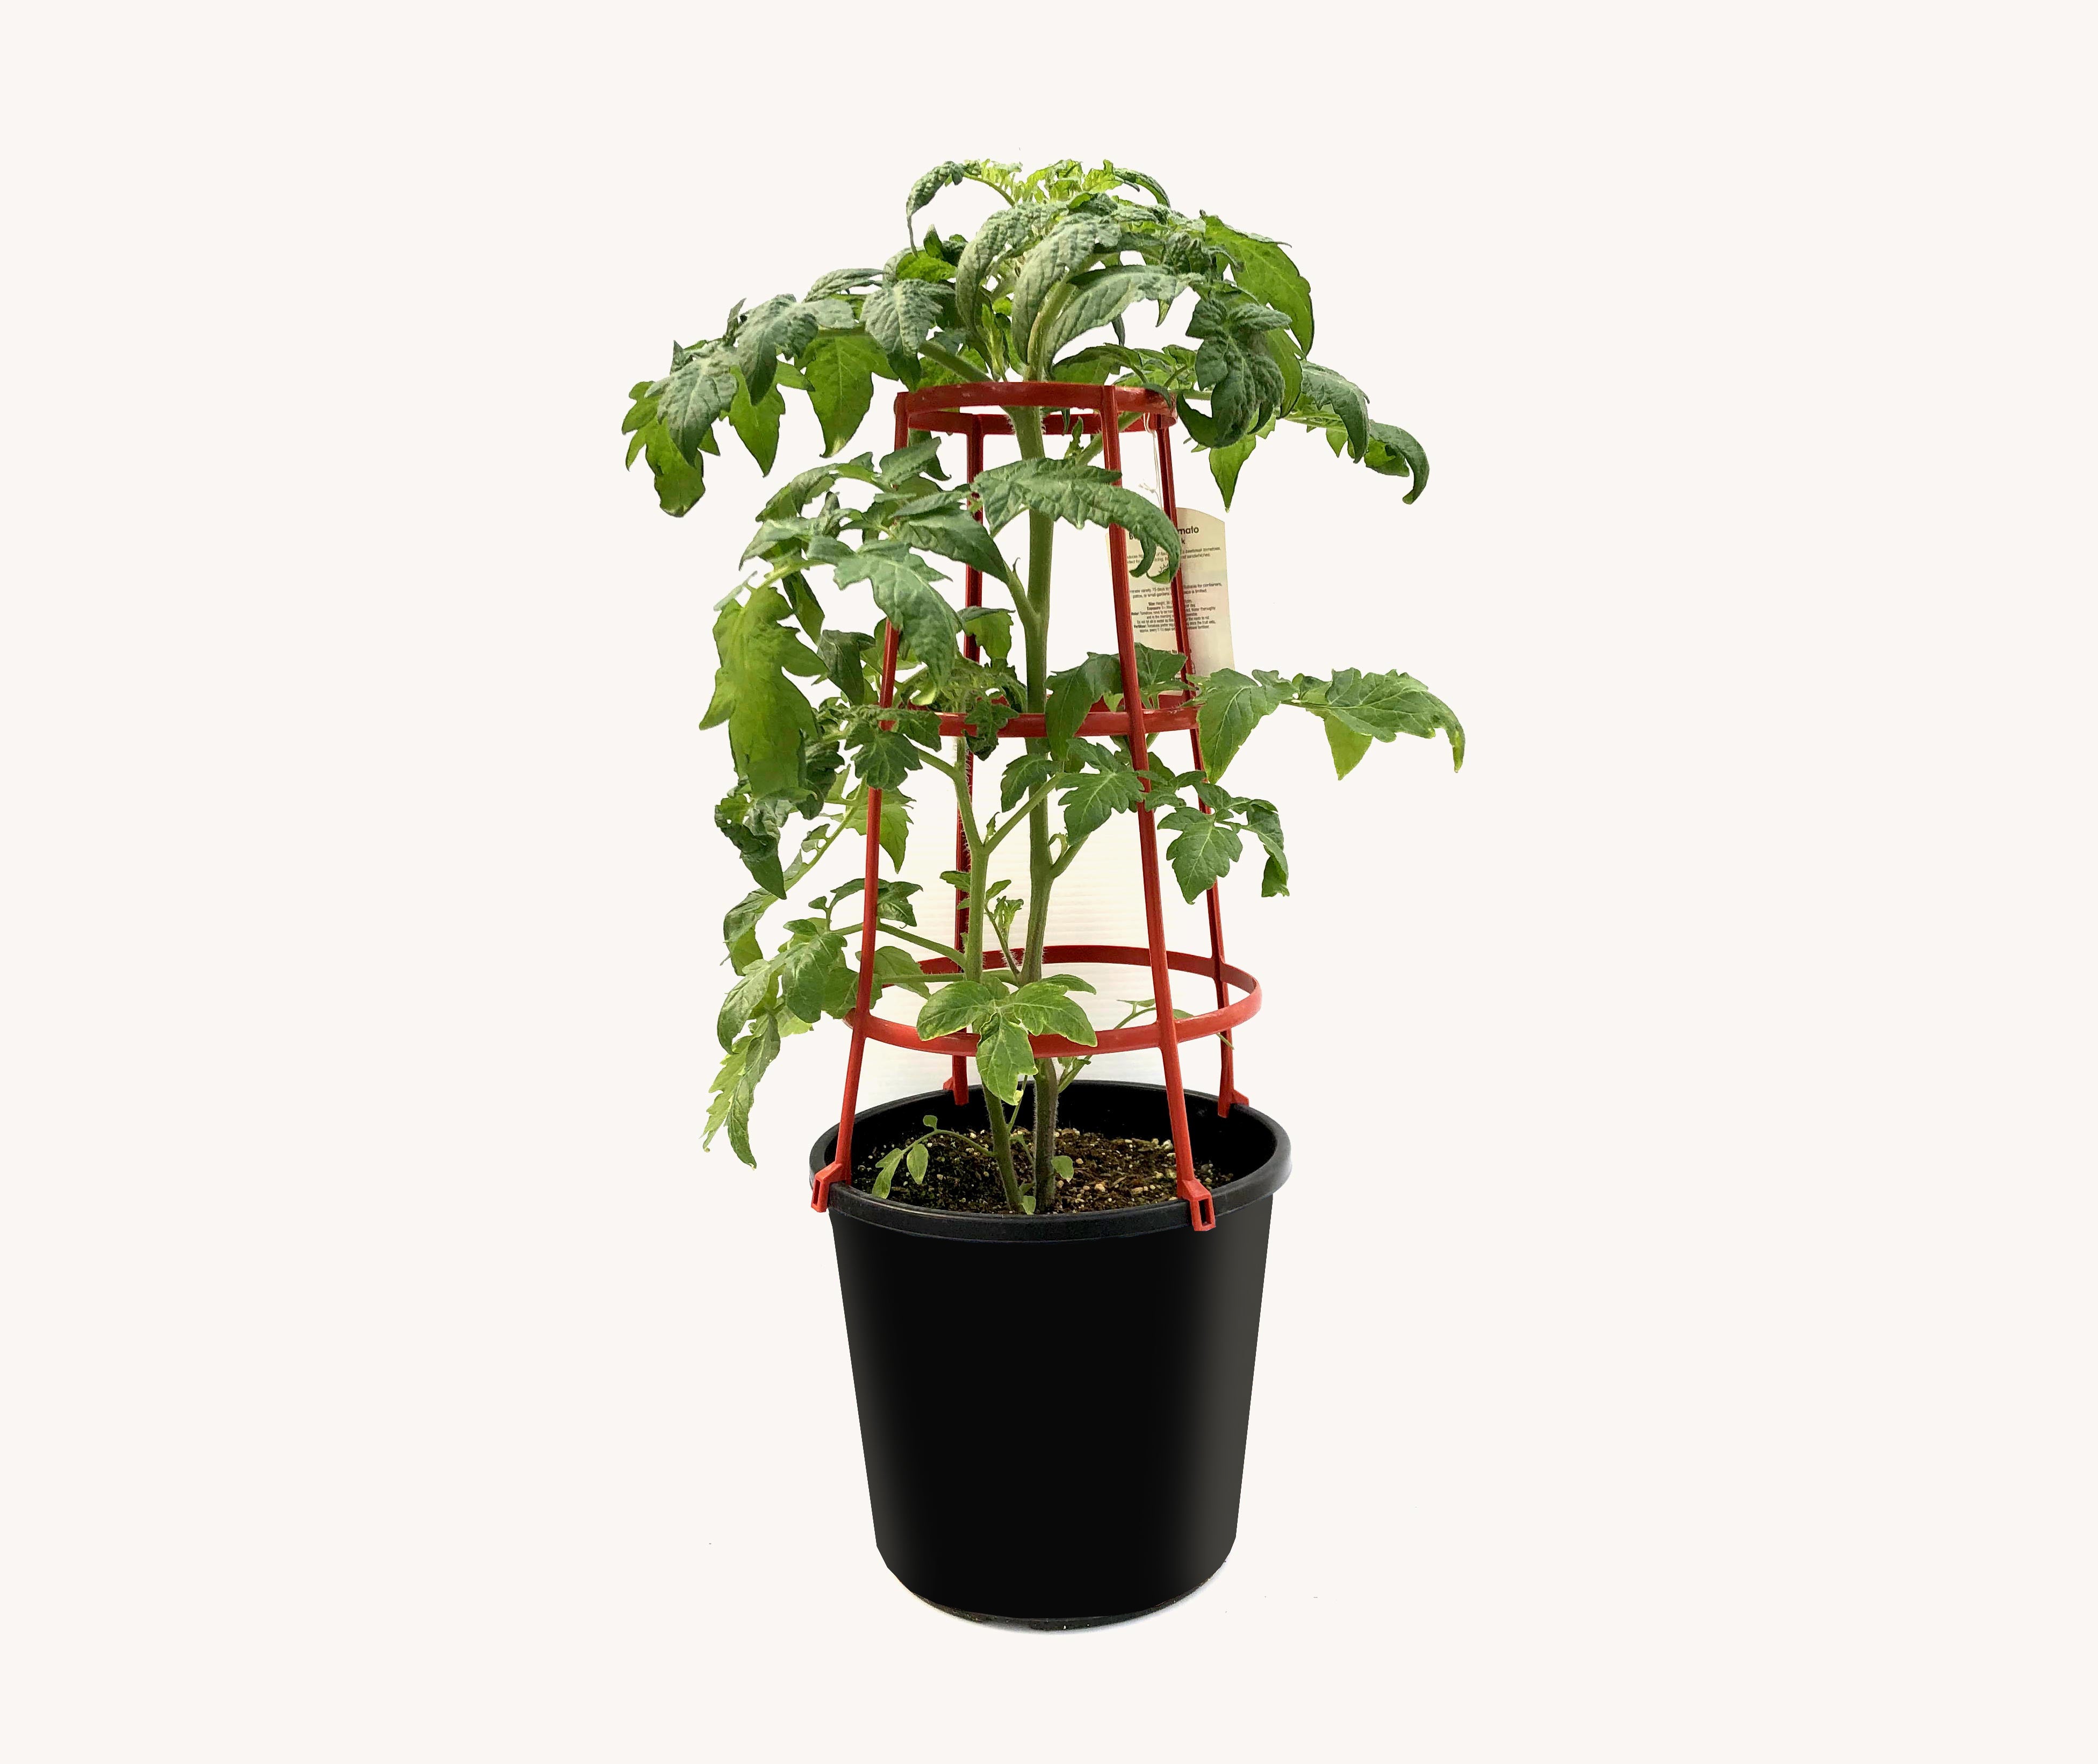 Roma Tomato plants: Easy-to-Grow and Care for in Your Garden